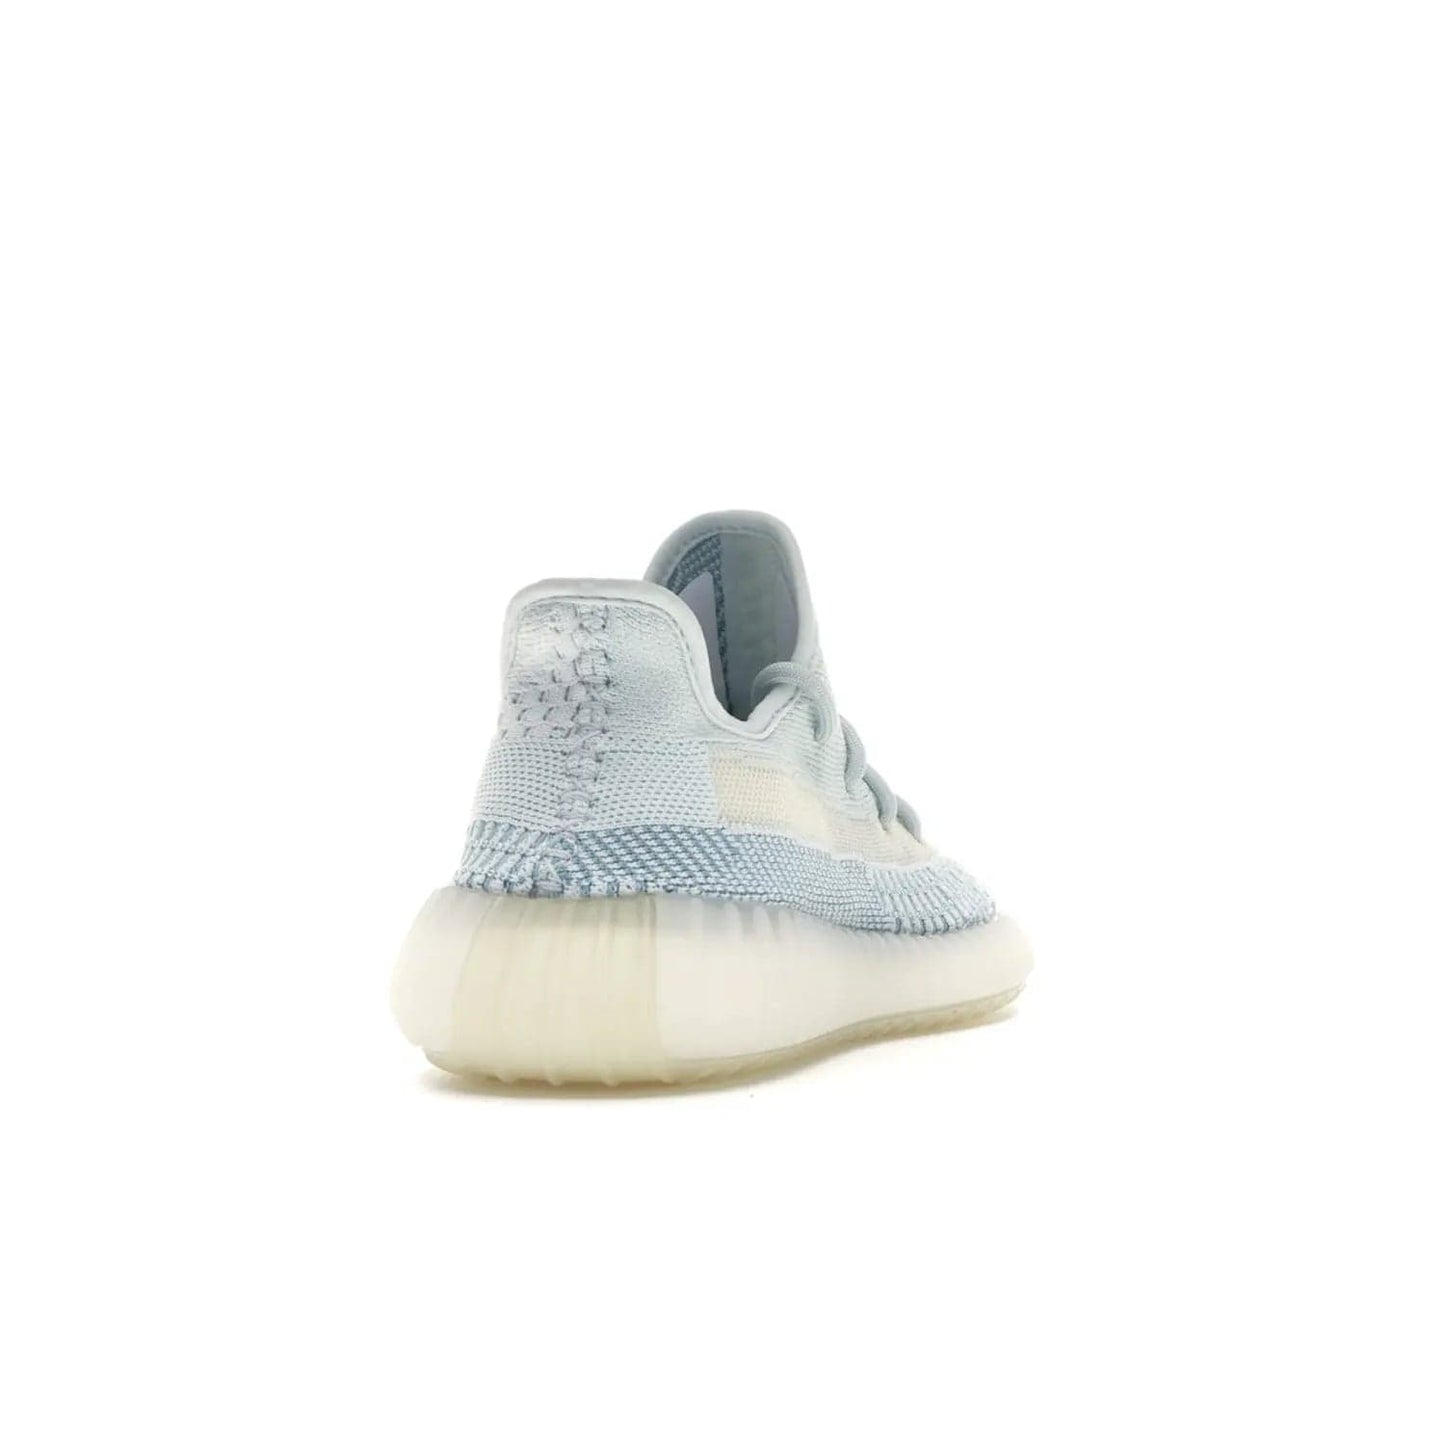 adidas Yeezy Boost 350 V2 Cloud White (Non-Reflective) - Image 30 - Only at www.BallersClubKickz.com - Uniquely designed adidas Yeezy Boost 350 V2 Cloud White (Non-Reflective) with a Primeknit upper in shades of cream and blue with a contrasting hard sole. A fashion-forward sneaker with a transparent strip and blue-and-white patterns.